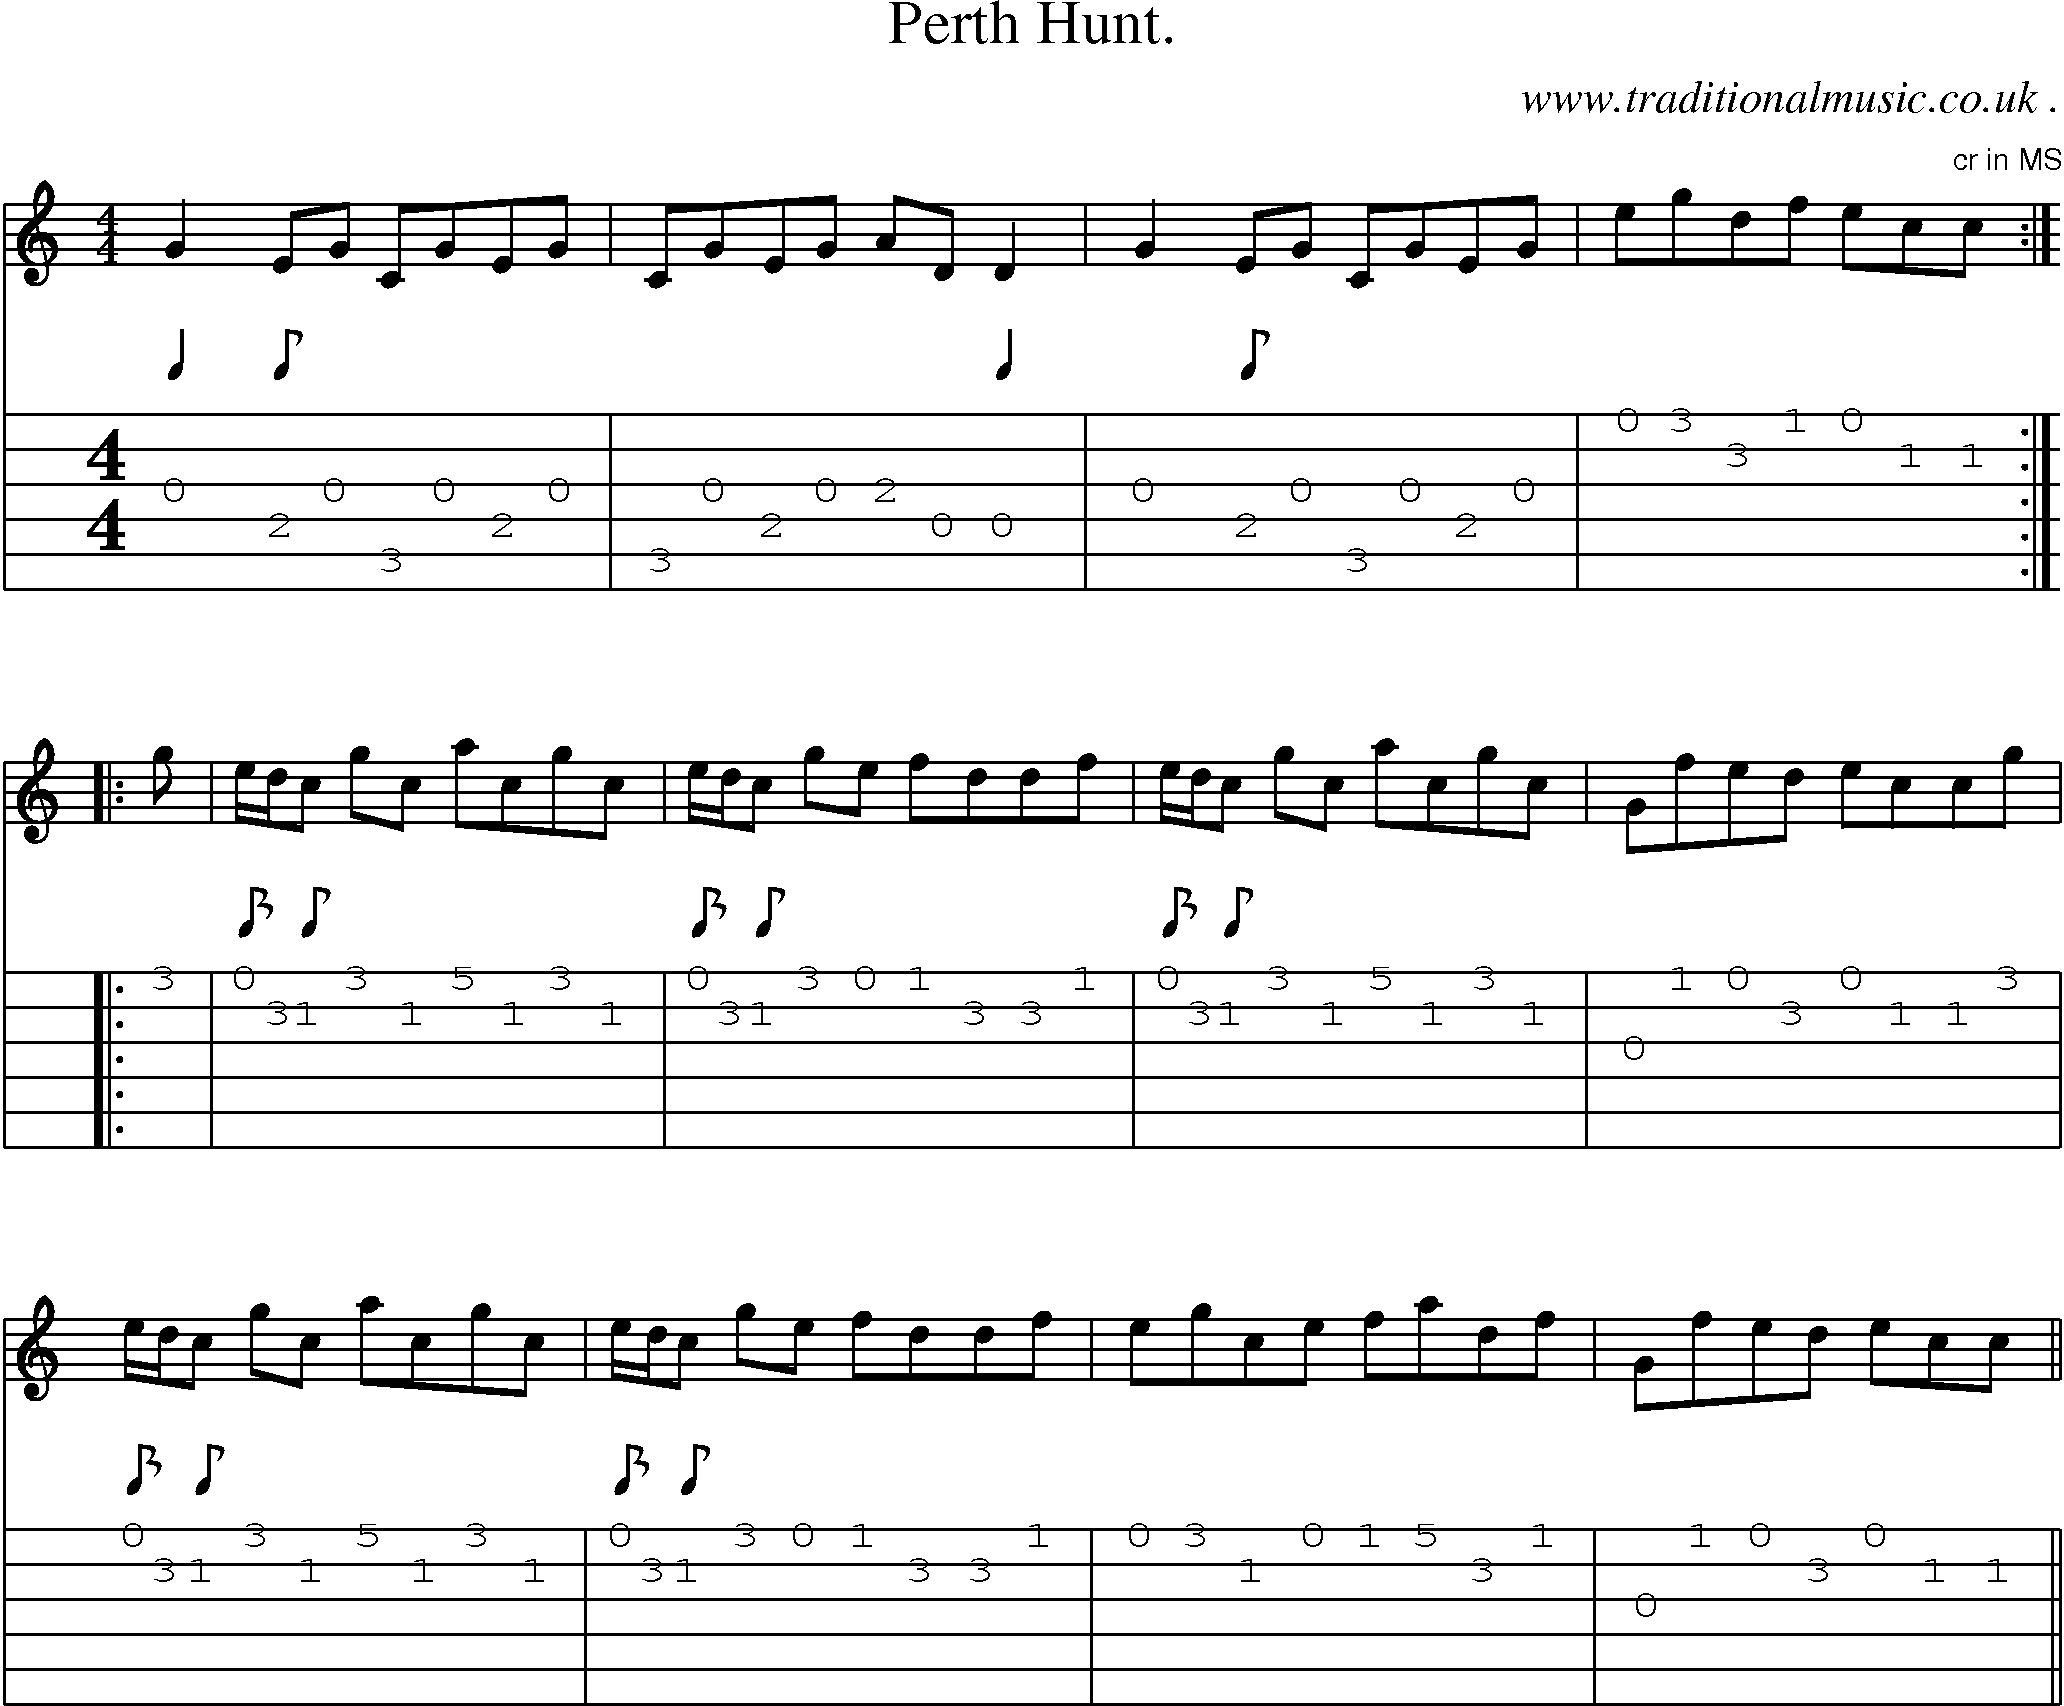 Sheet-Music and Guitar Tabs for Perth Hunt